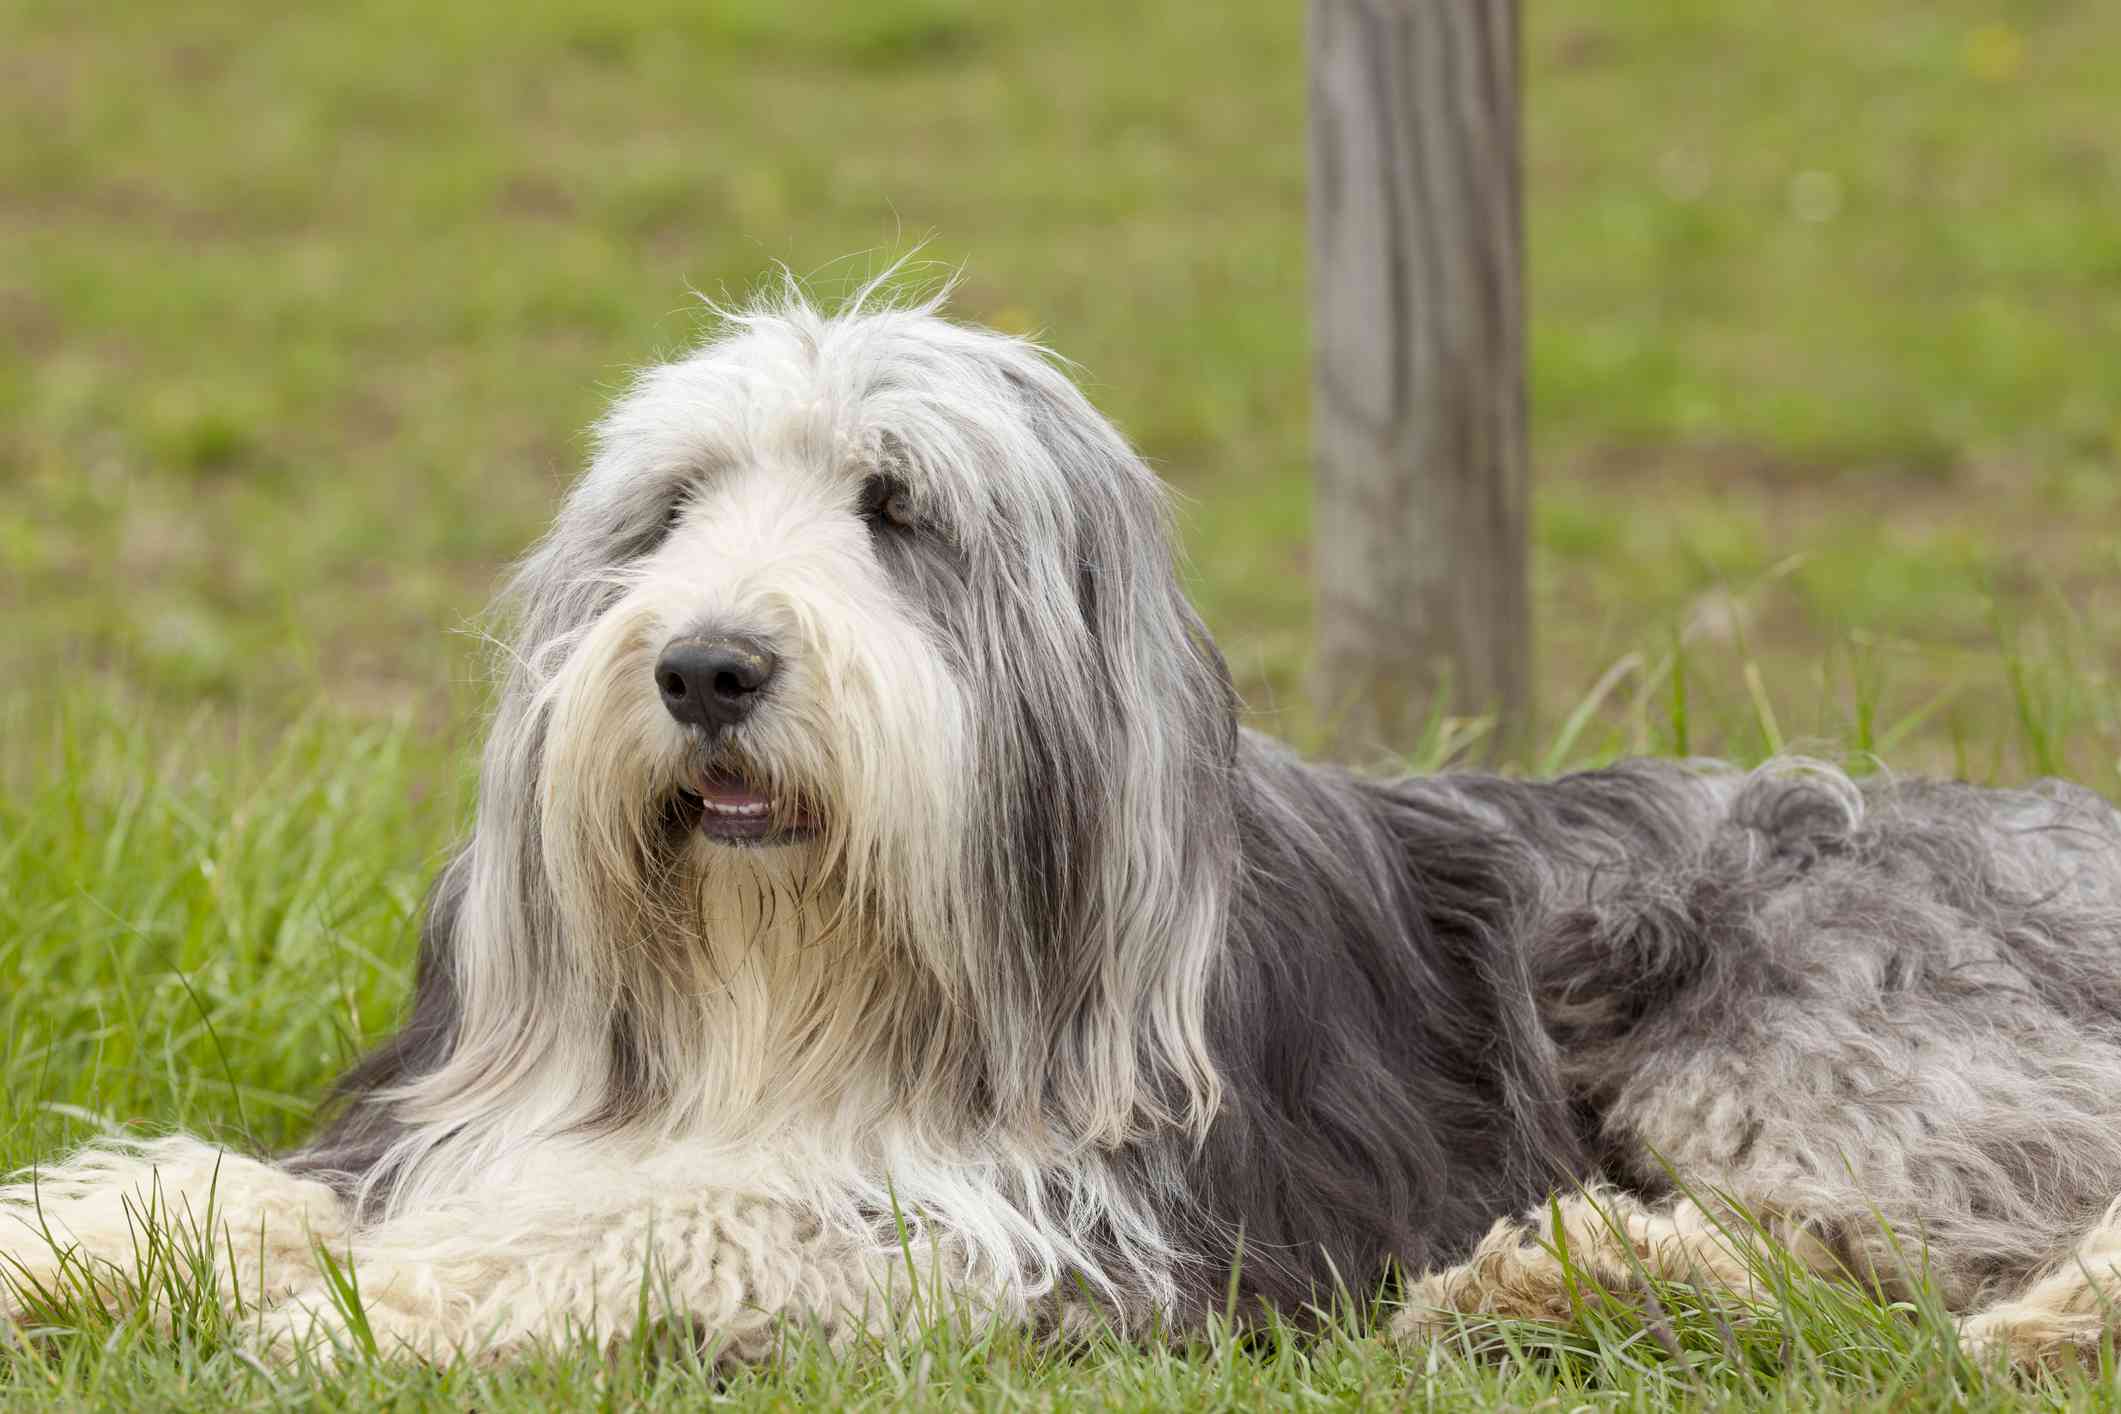 Bearded Collie laying down in grass in front of a tree